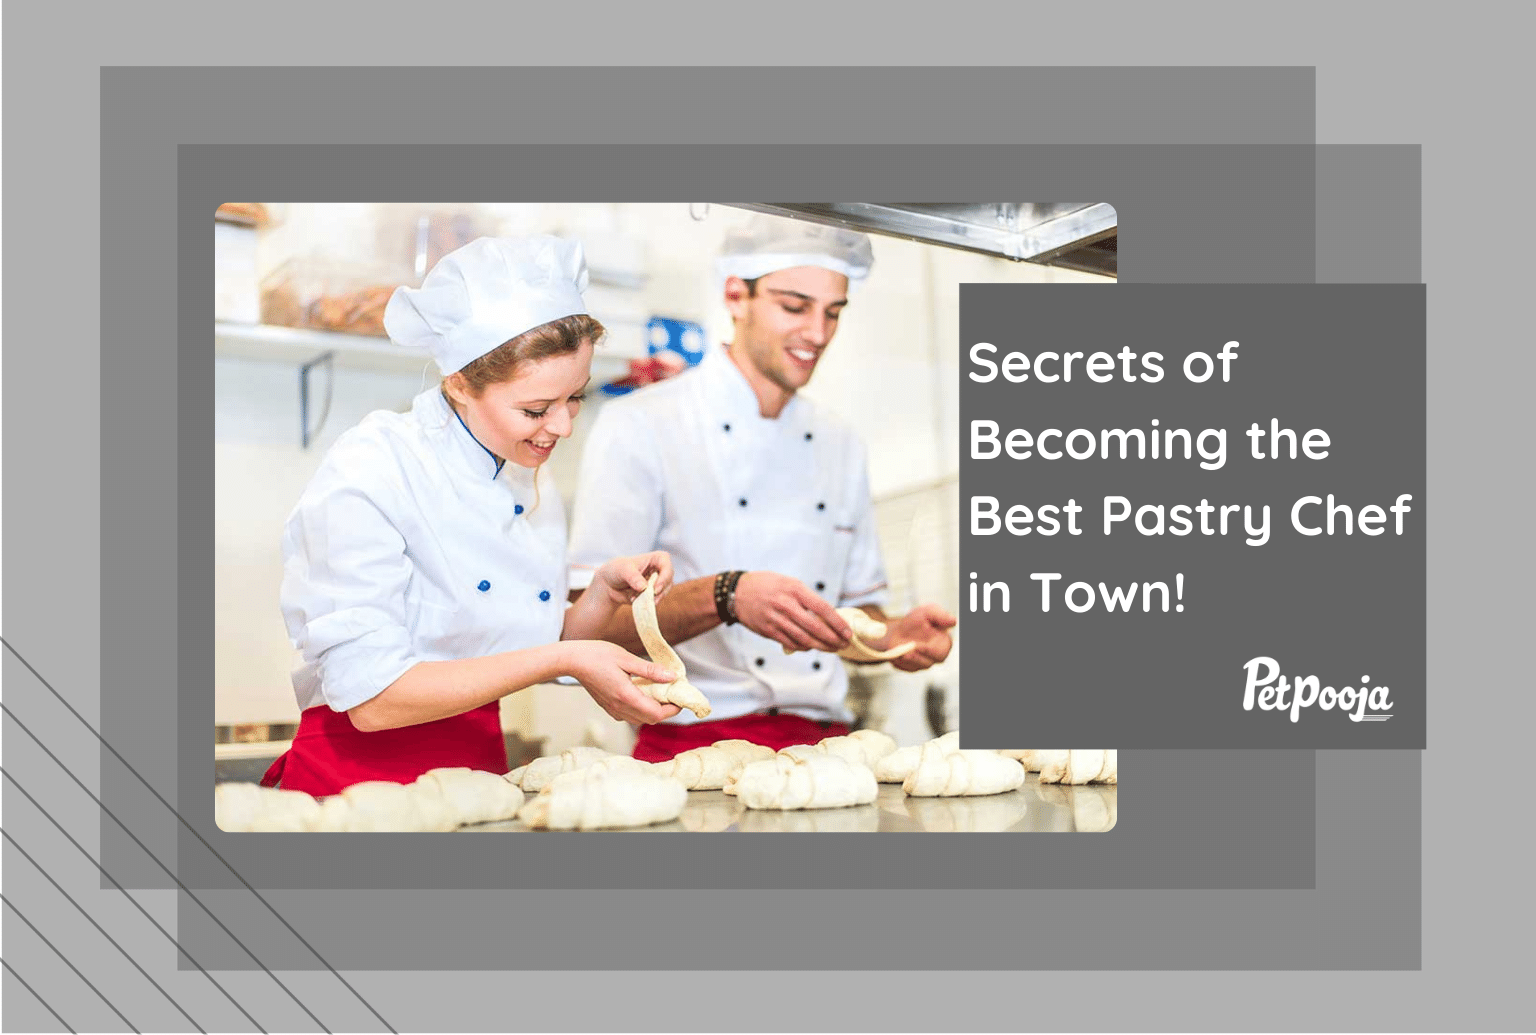 Who is a pastry chef & what are his/her roles?